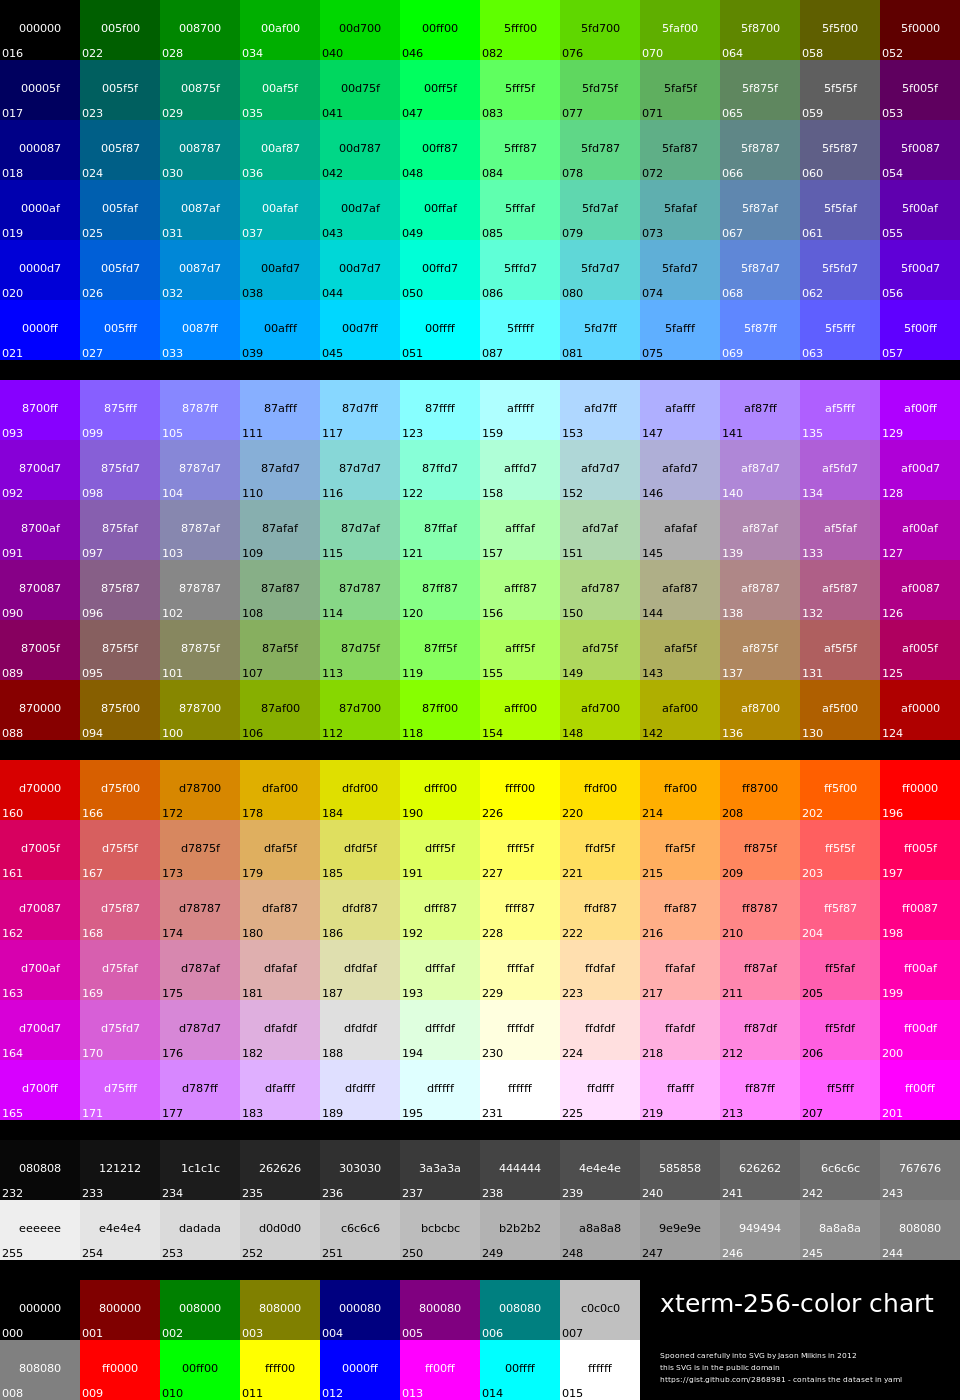 a reference image showing colored tiles and text with the color's corresponding bash color code